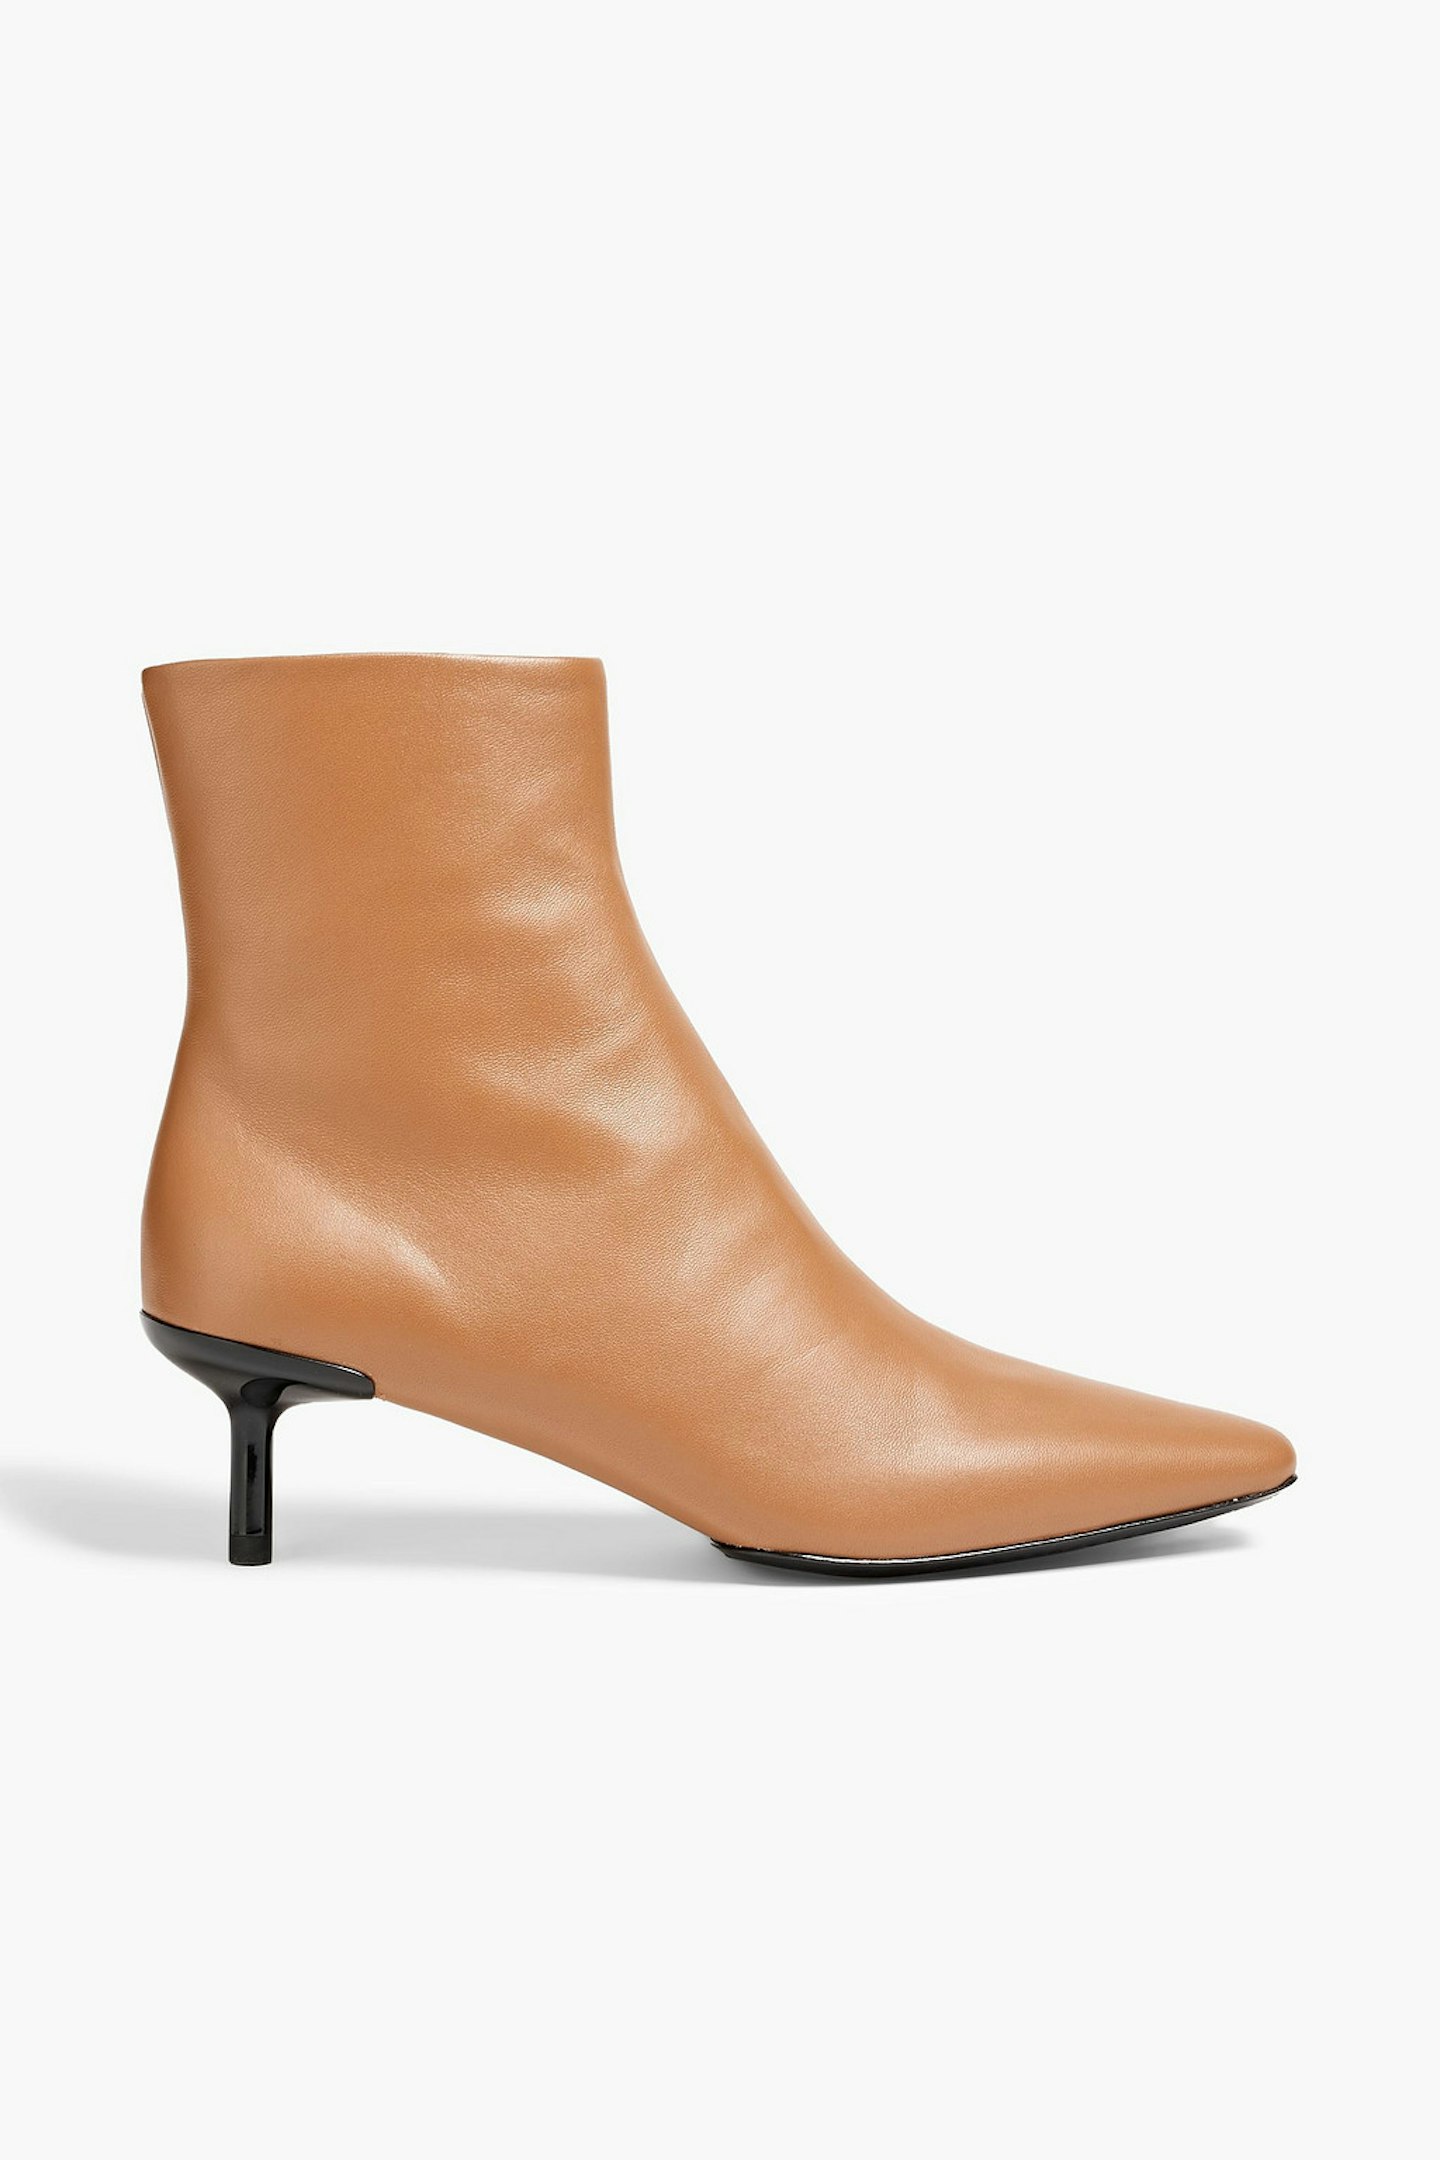 rag and bone boots outnet sale